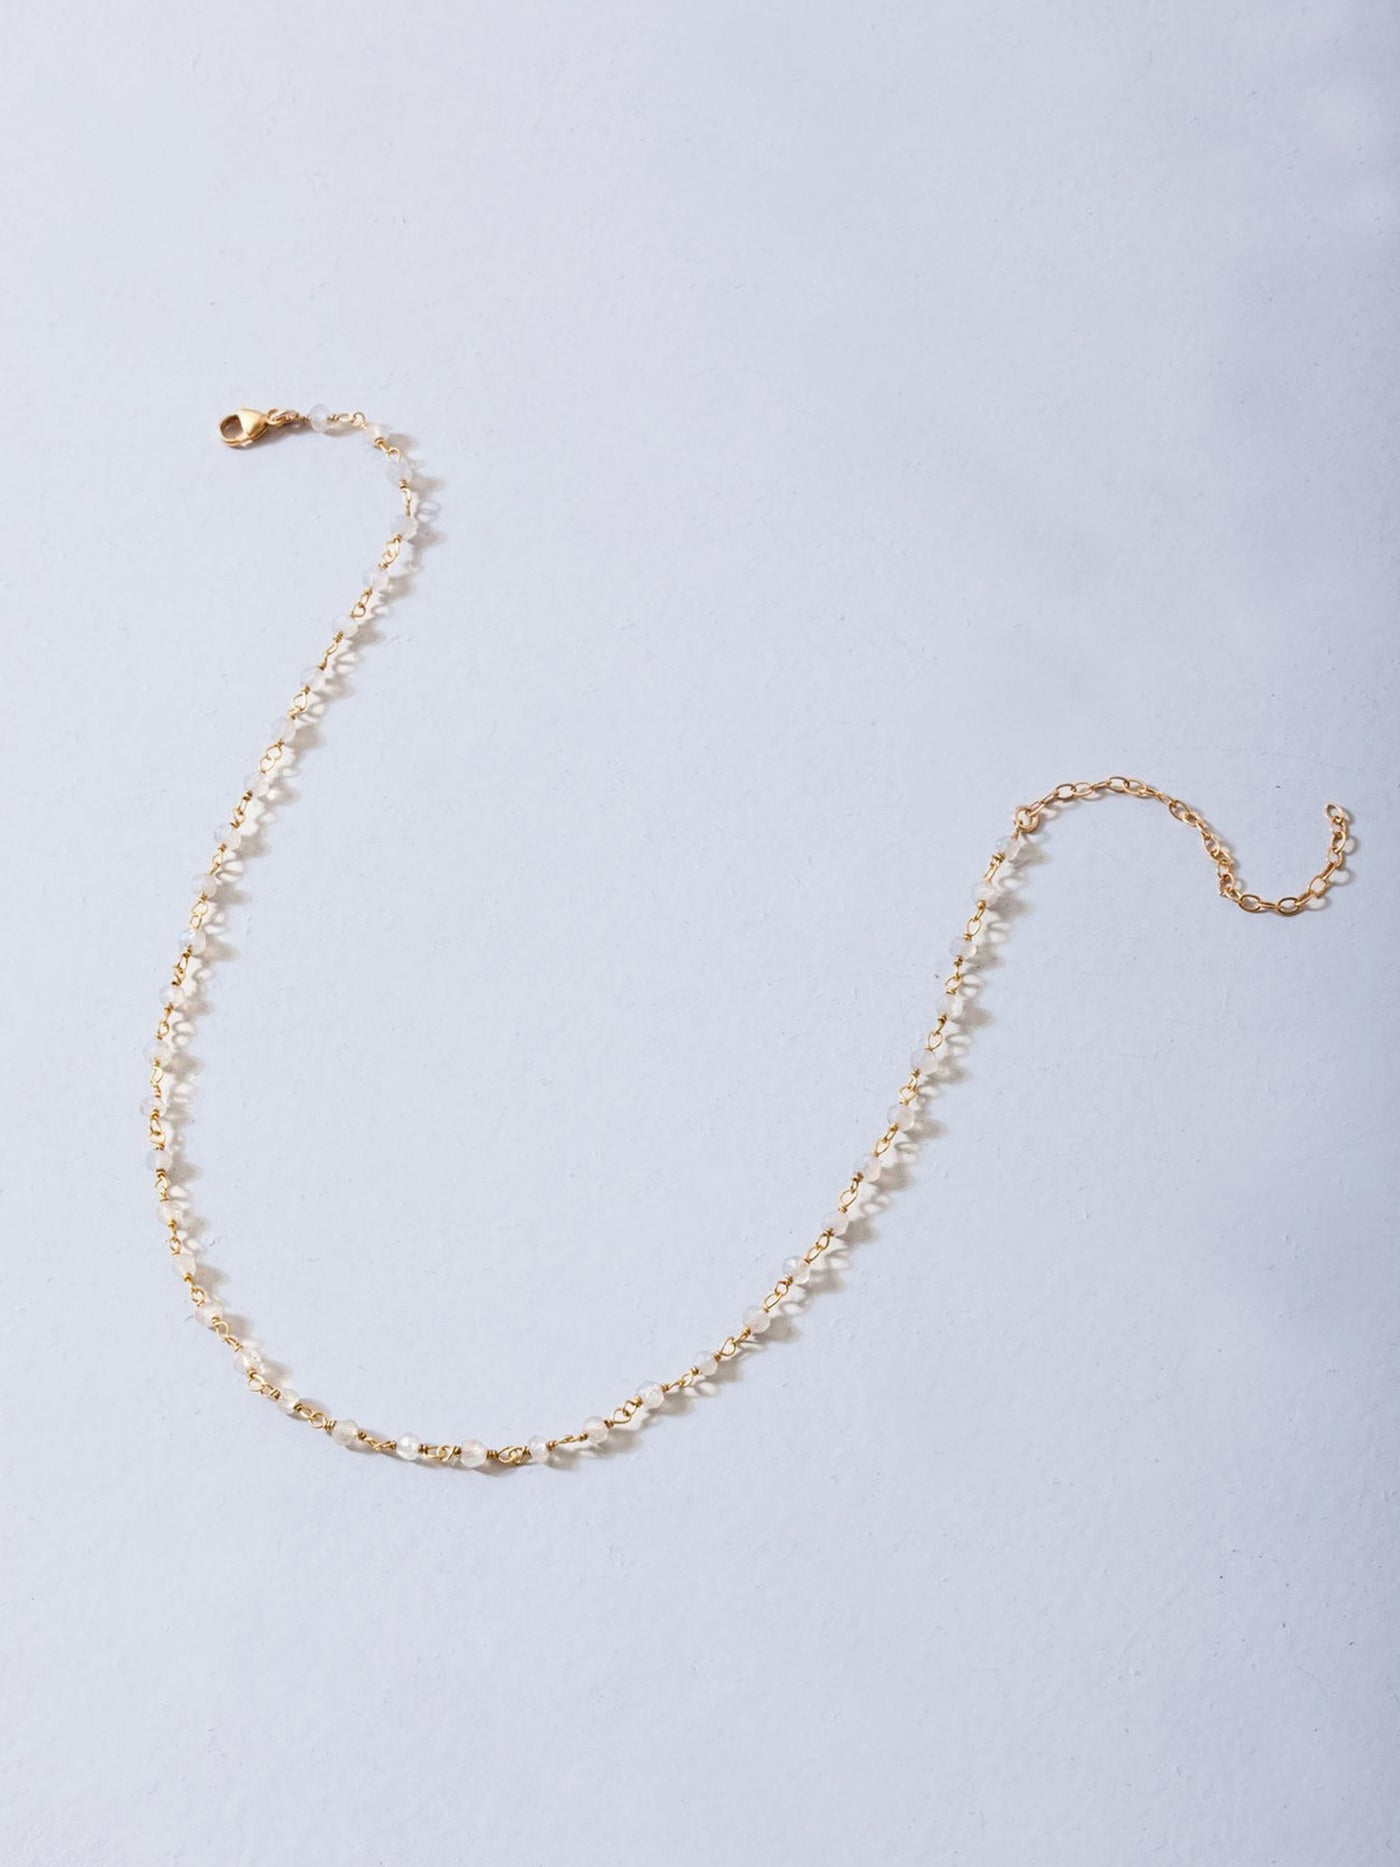 Gold Moonstone Choker. Moonstone crystals set between gold vermeil chain with an added extension to ensure a perfect fit. Also doubles as a bracelet.